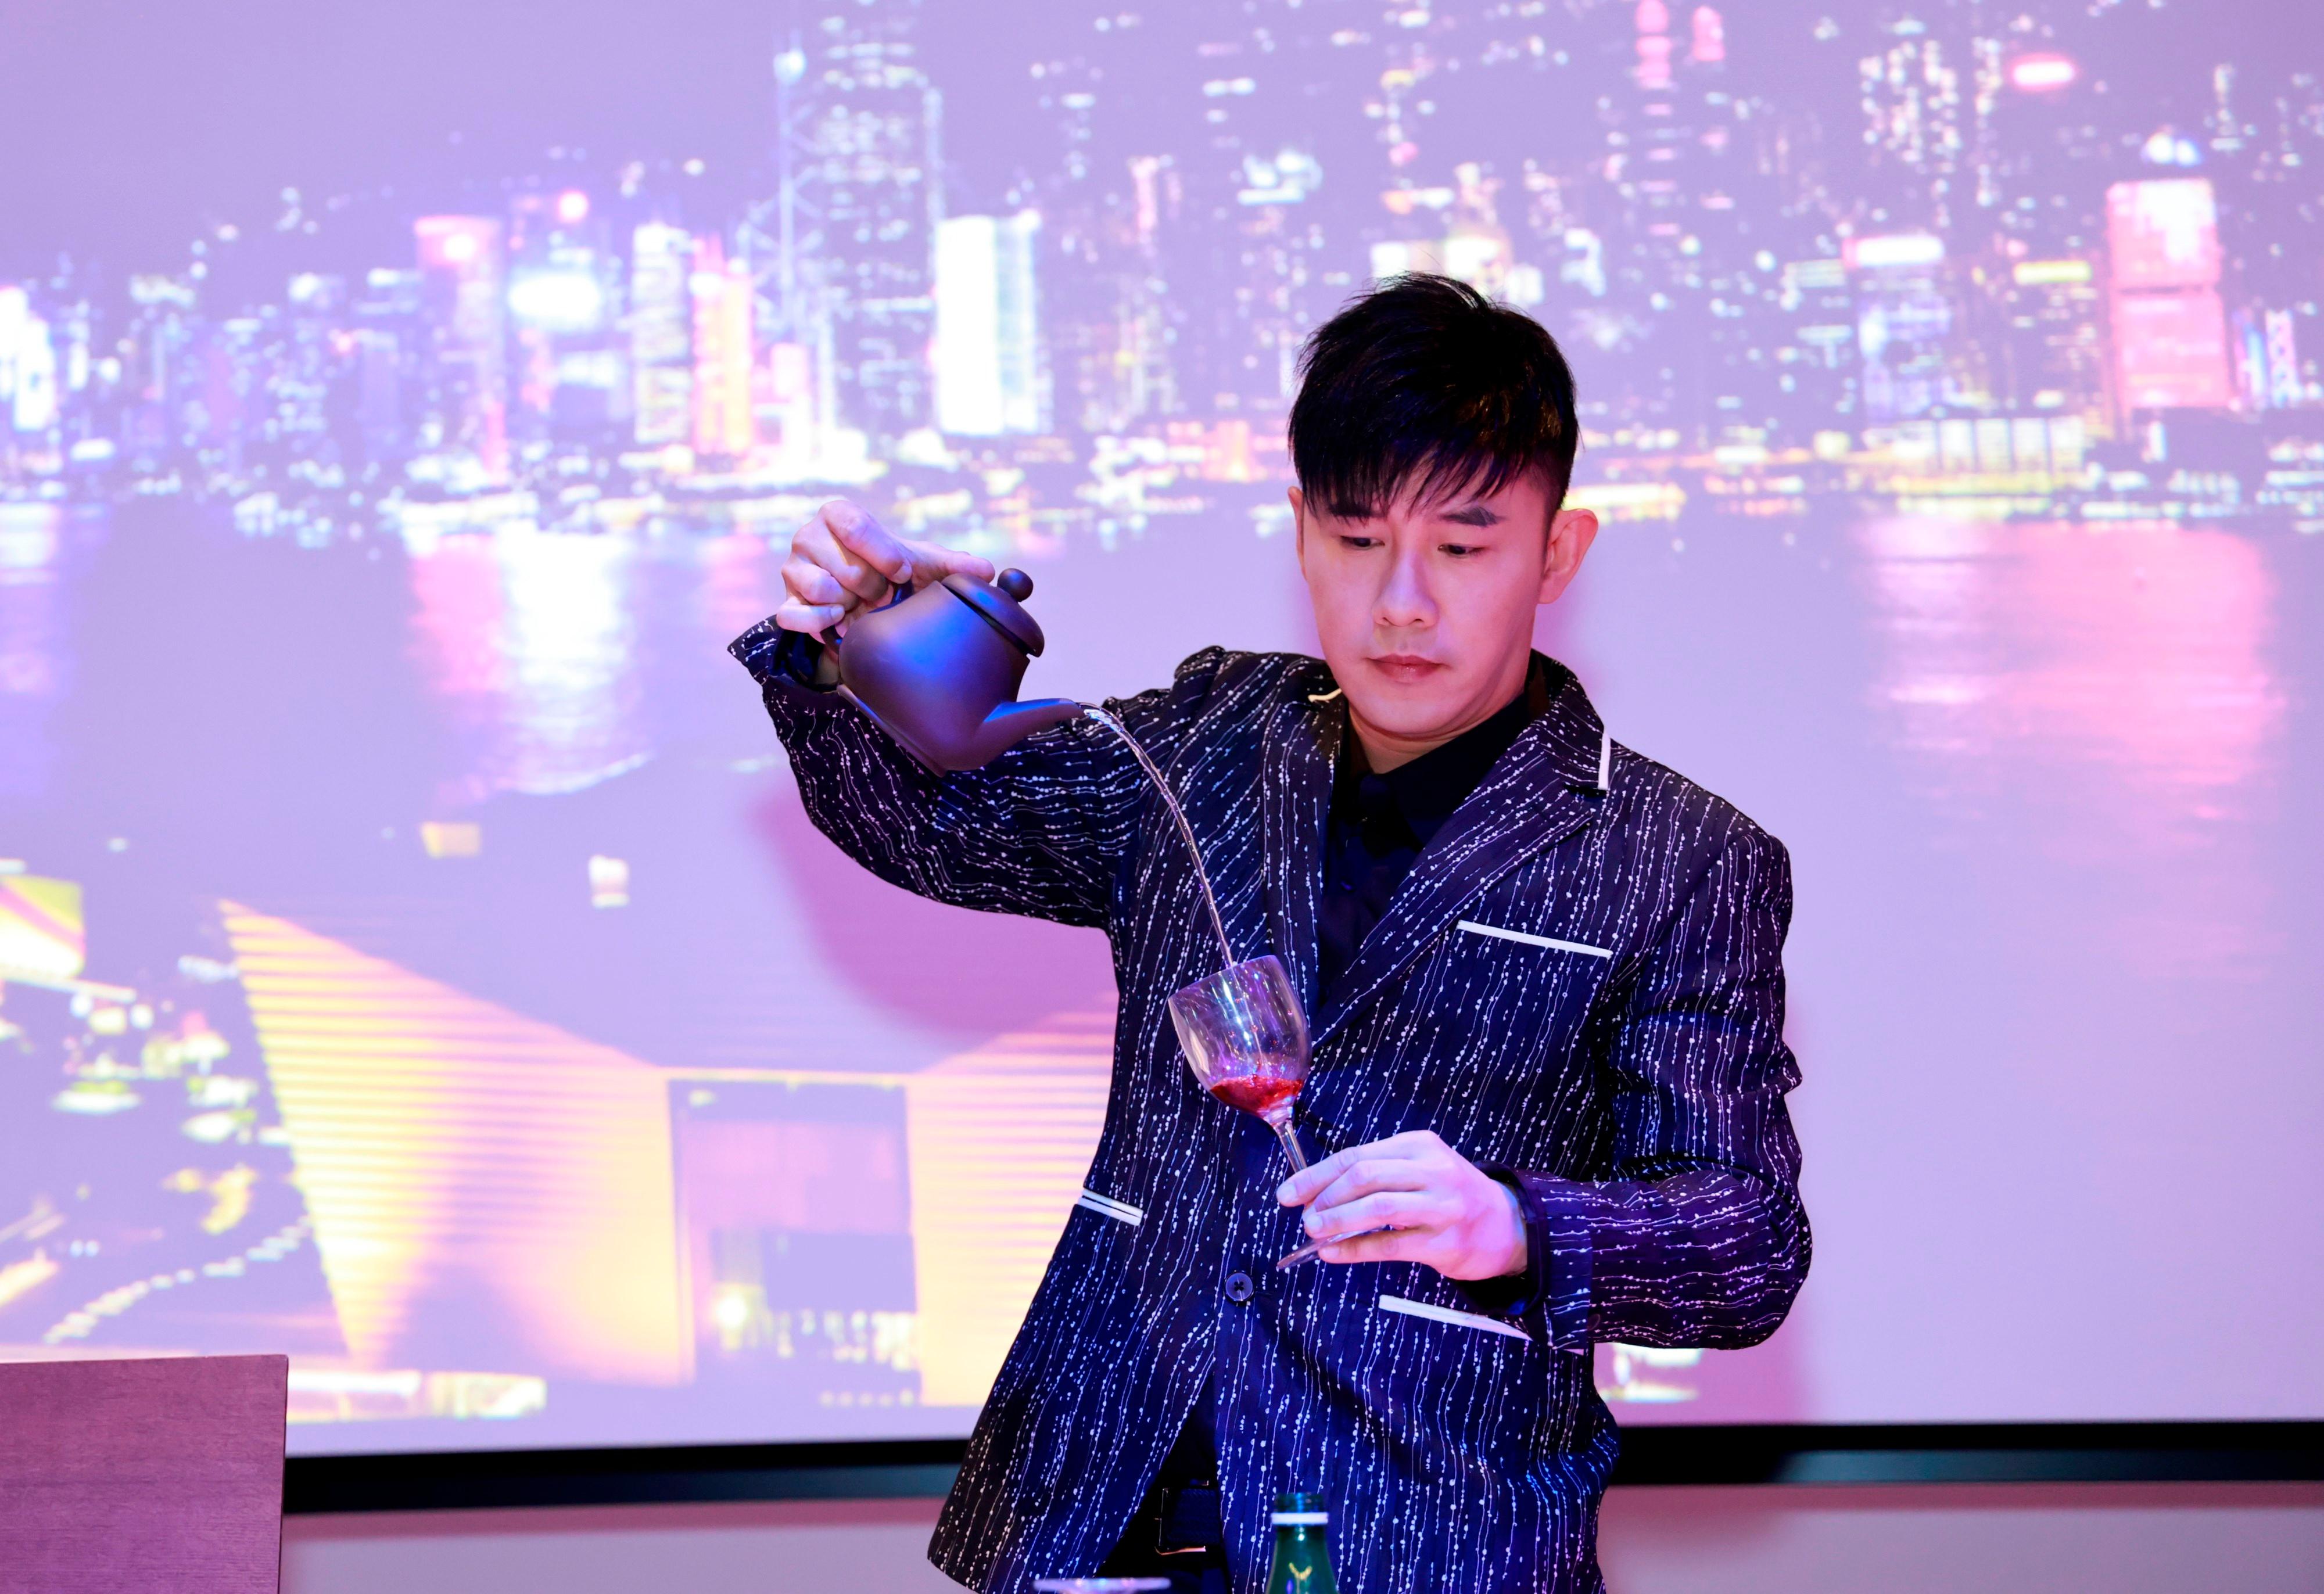 Hong Kong magician Louis Yan performs at the Lunar New Year reception hosted by the Hong Kong Economic and Trade Office, Toronto and the Hong Kong Tourism Board (Canada) in Toronto today (January 19, Toronto time).